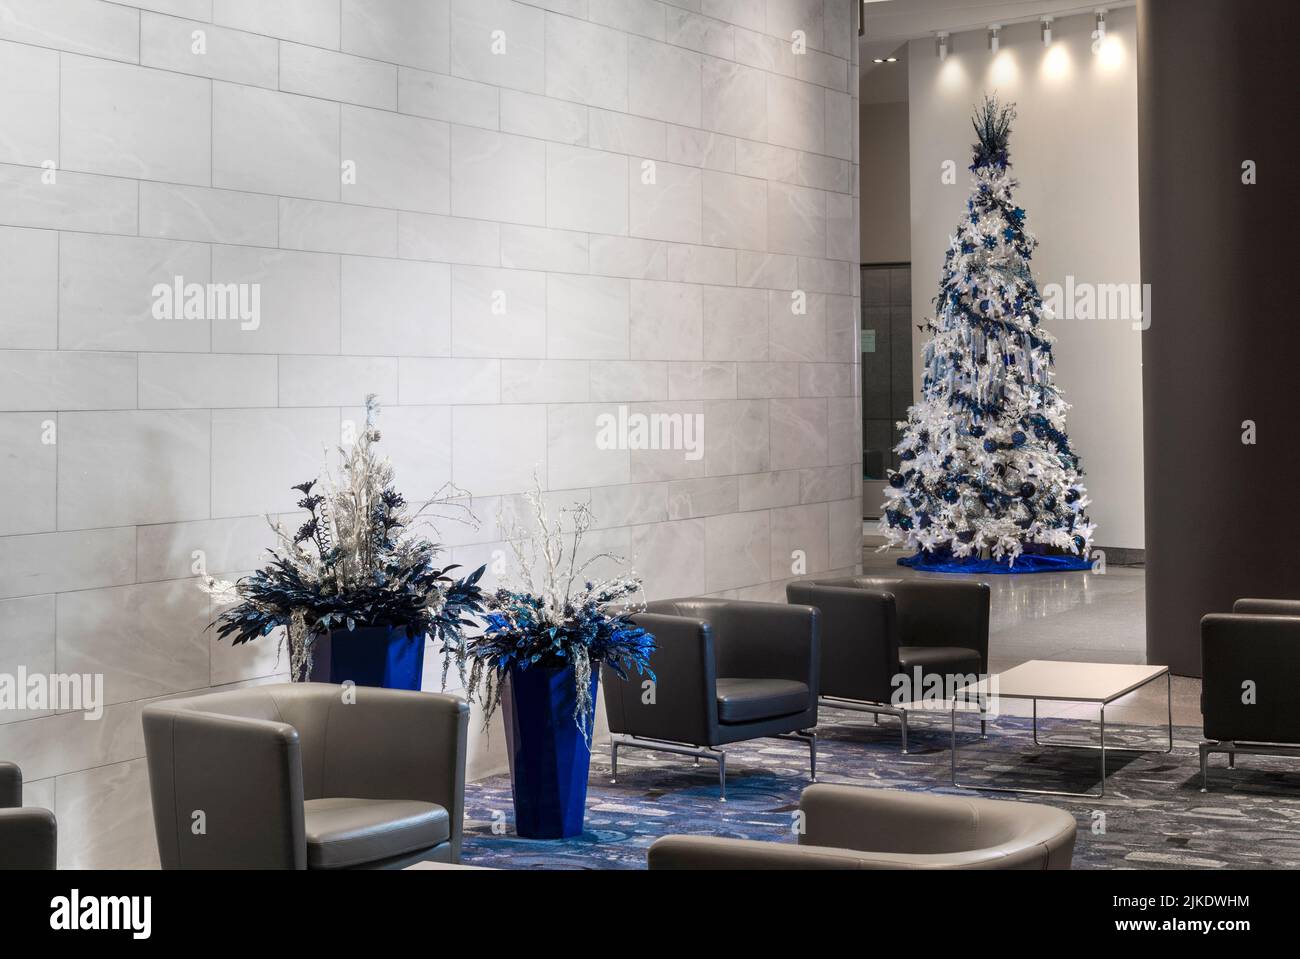 Commercial building modern office lobby decorated for Christmas with Christmas tree, Philadelphia Pennsylvania USA Stock Photo